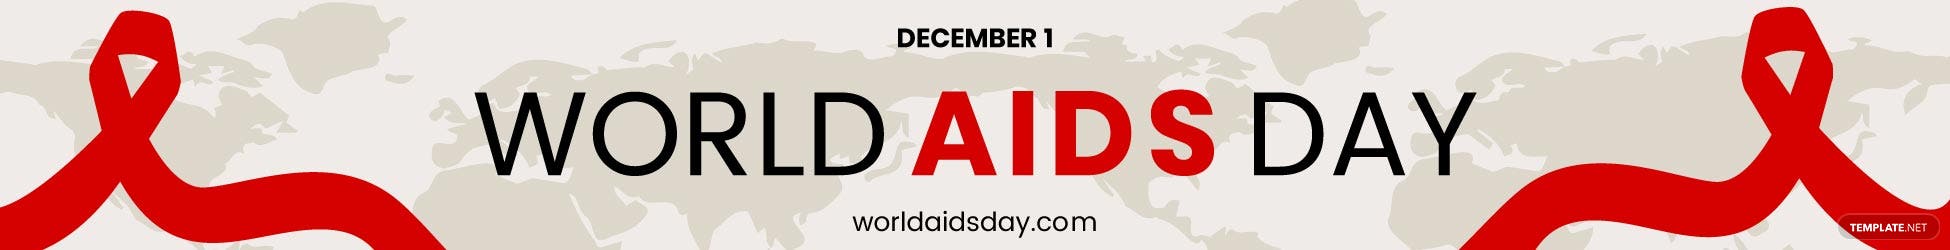 world aids day website banner ideas and examples